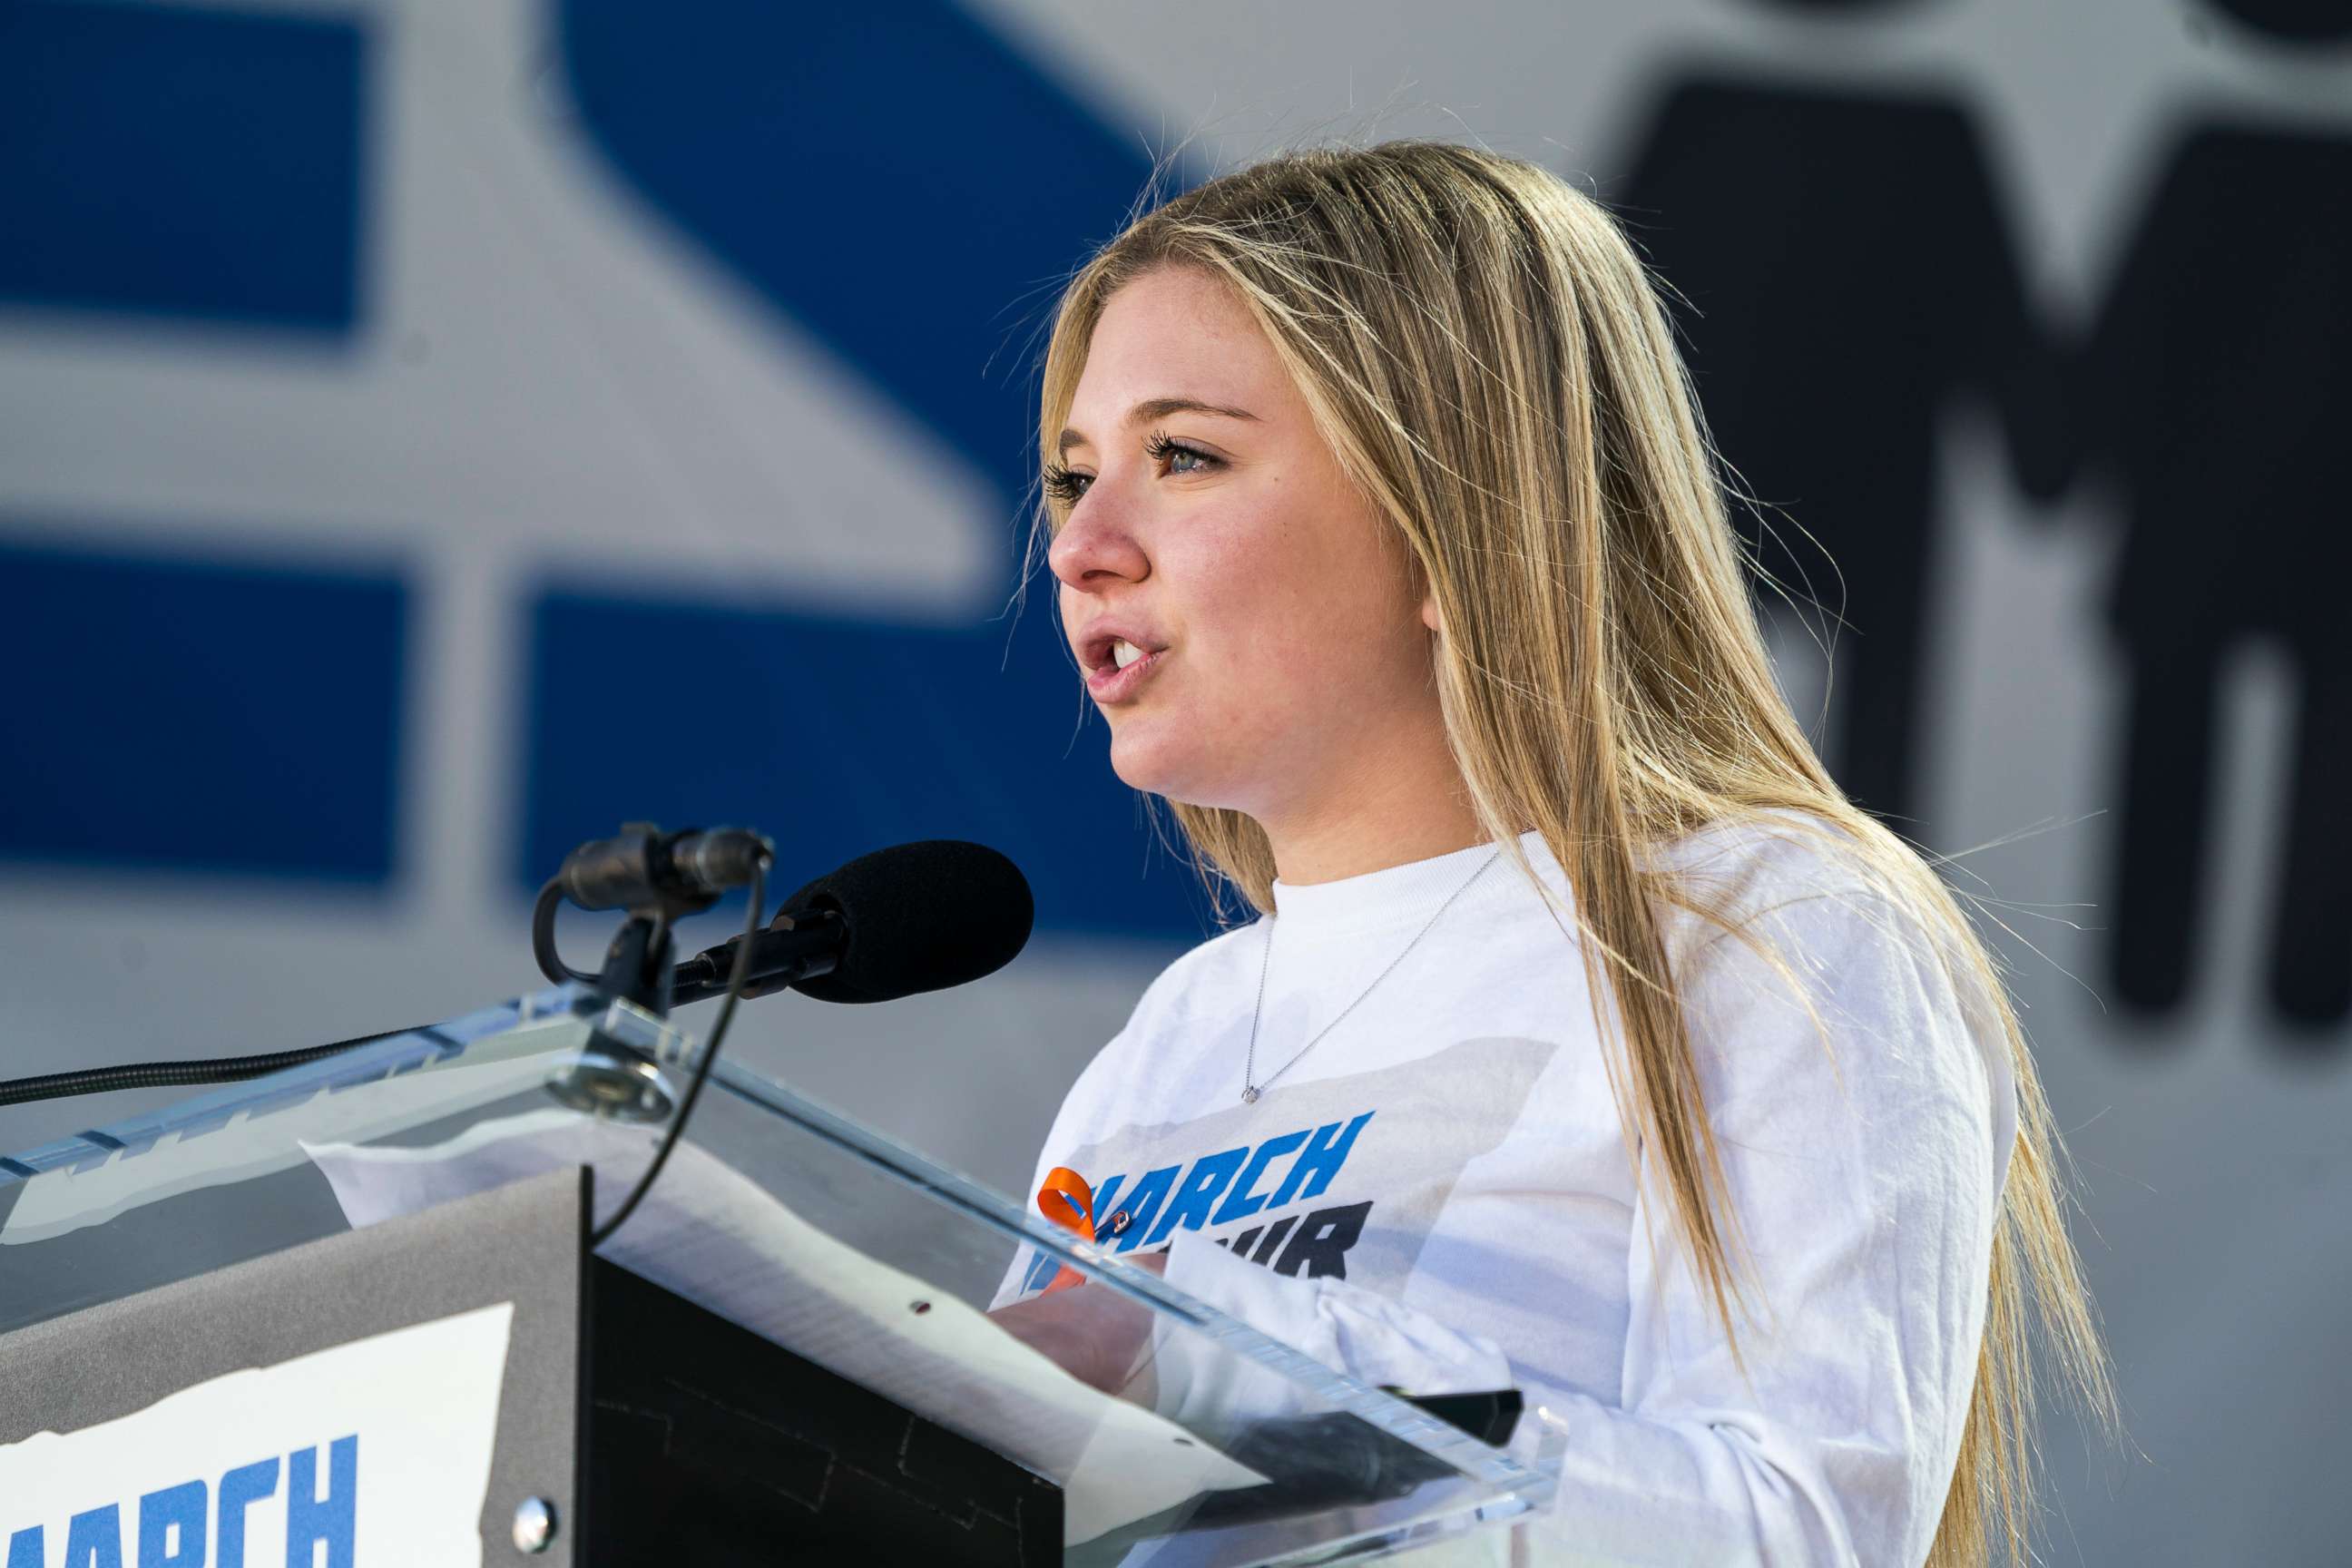 PHOTO: Jaclyn Corin, a survivor of the school shooting at Marjory Stoneman Douglas High School, speaks at the March For Our Lives in Washington, D.C., March 24, 2018.